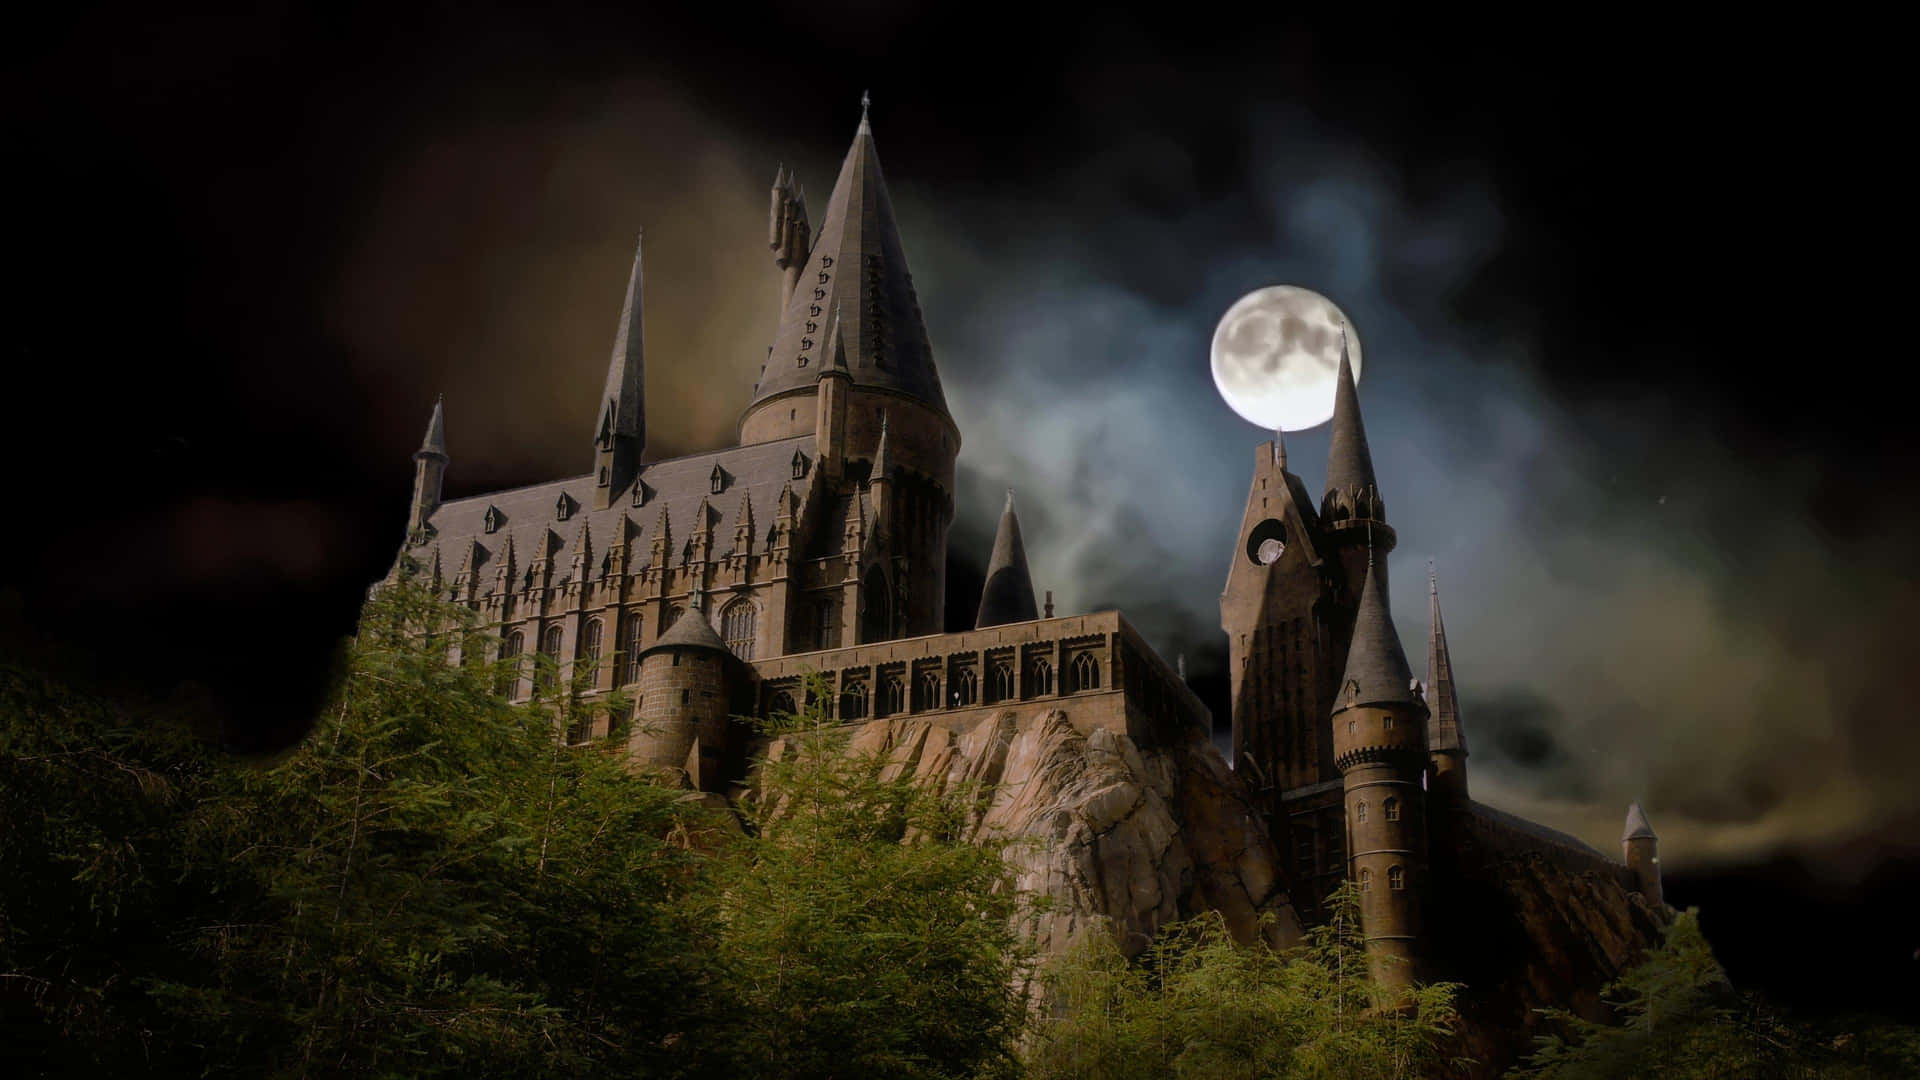 “This is Hogwarts, a powerful place of learning, friendship, and magic.”